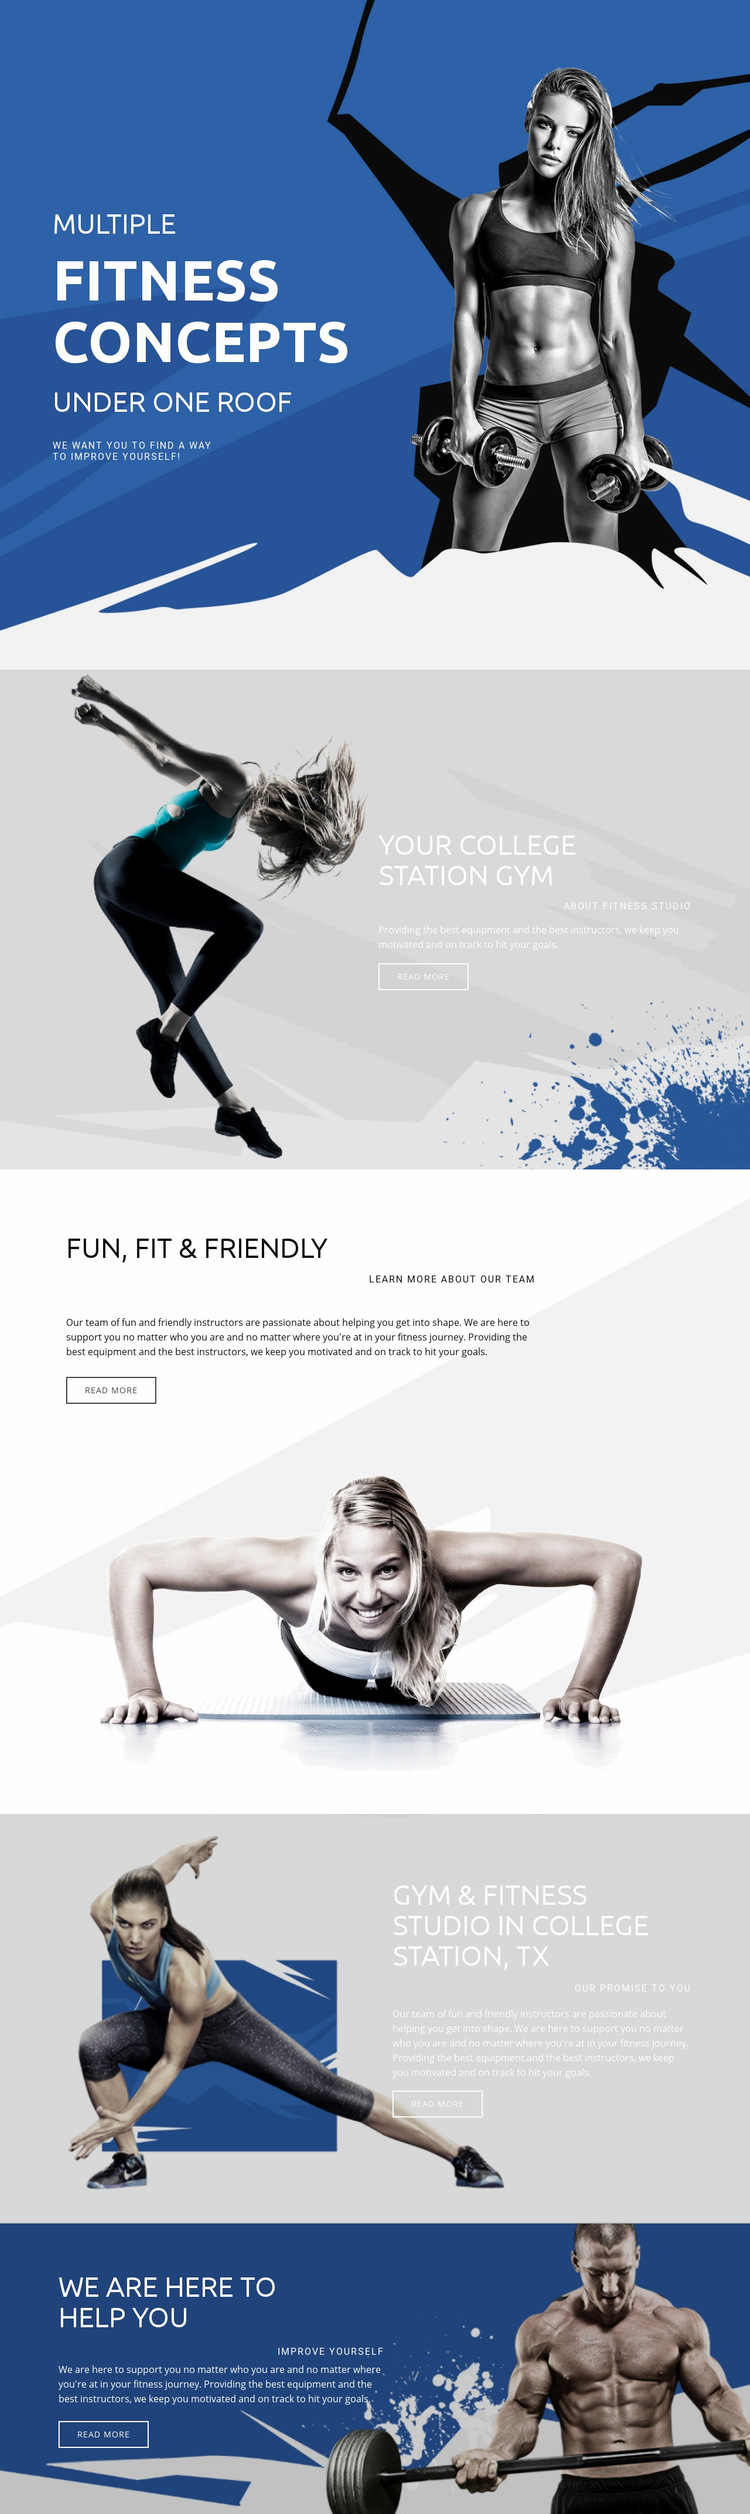 Best fitness and sports Web Page Design